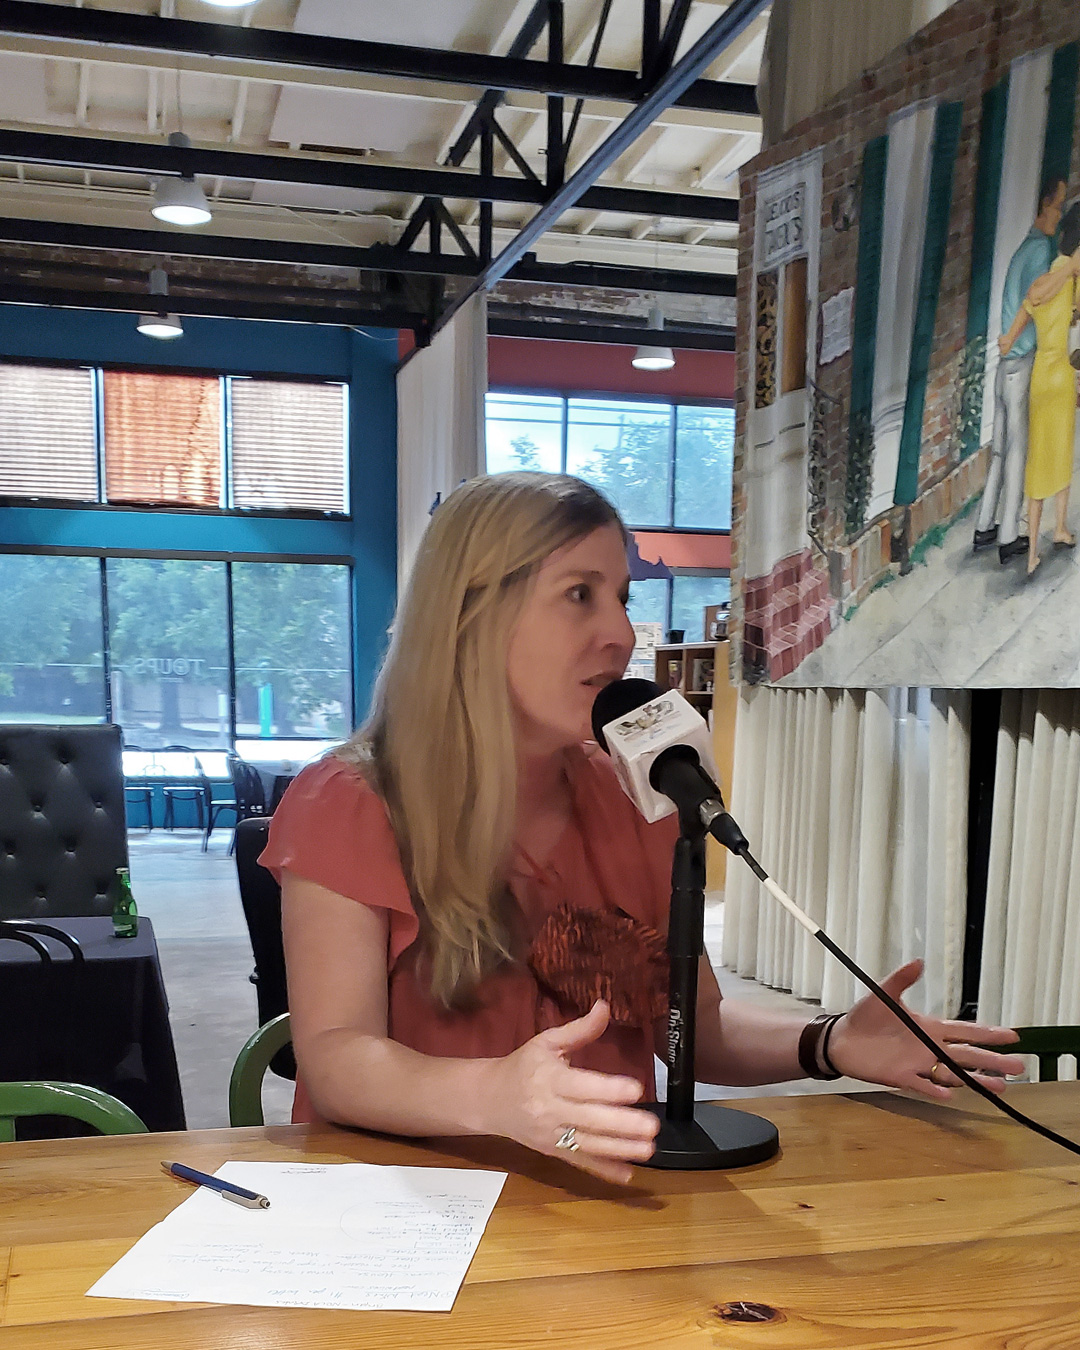 NOLADrinks Show – Louisiana Hospitality Industry – Jun20Ep1 – Jennifer Kelly, executive director of the Louisiana Hospitality Foundation at The Southern Food and Beverage Museum.